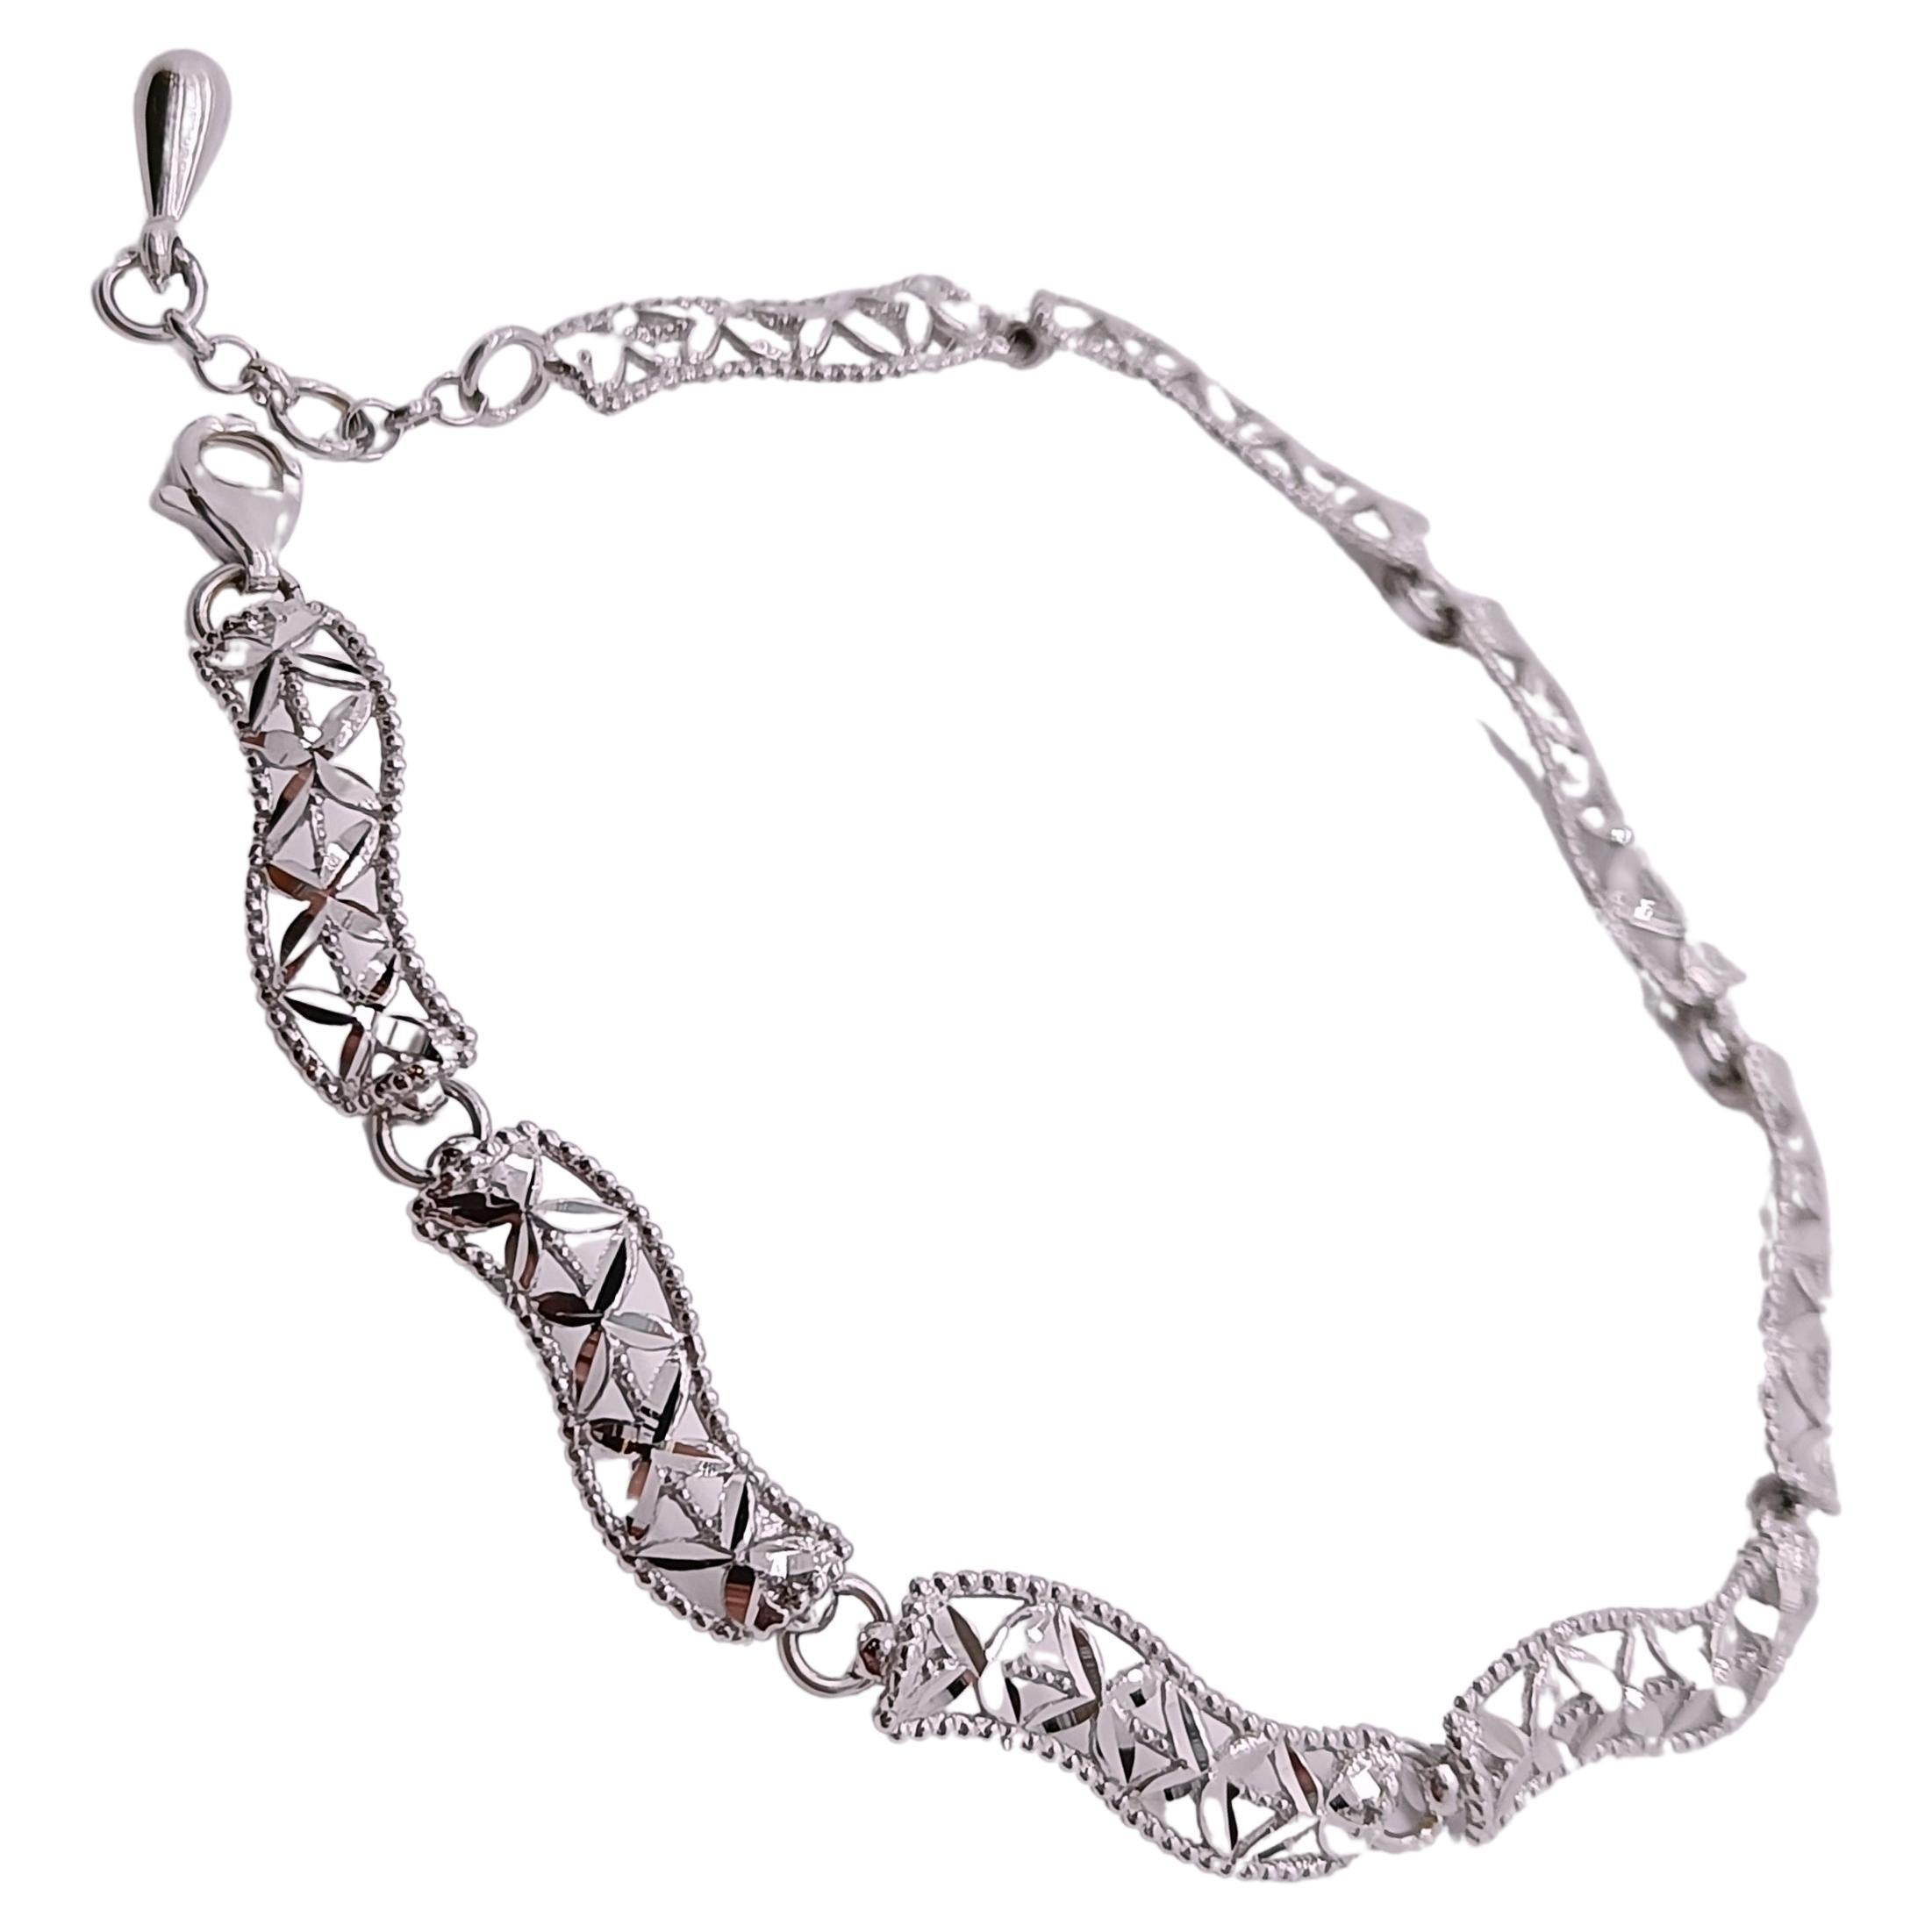 White gold bracelet 18k with workmanship that makes it bright For Sale